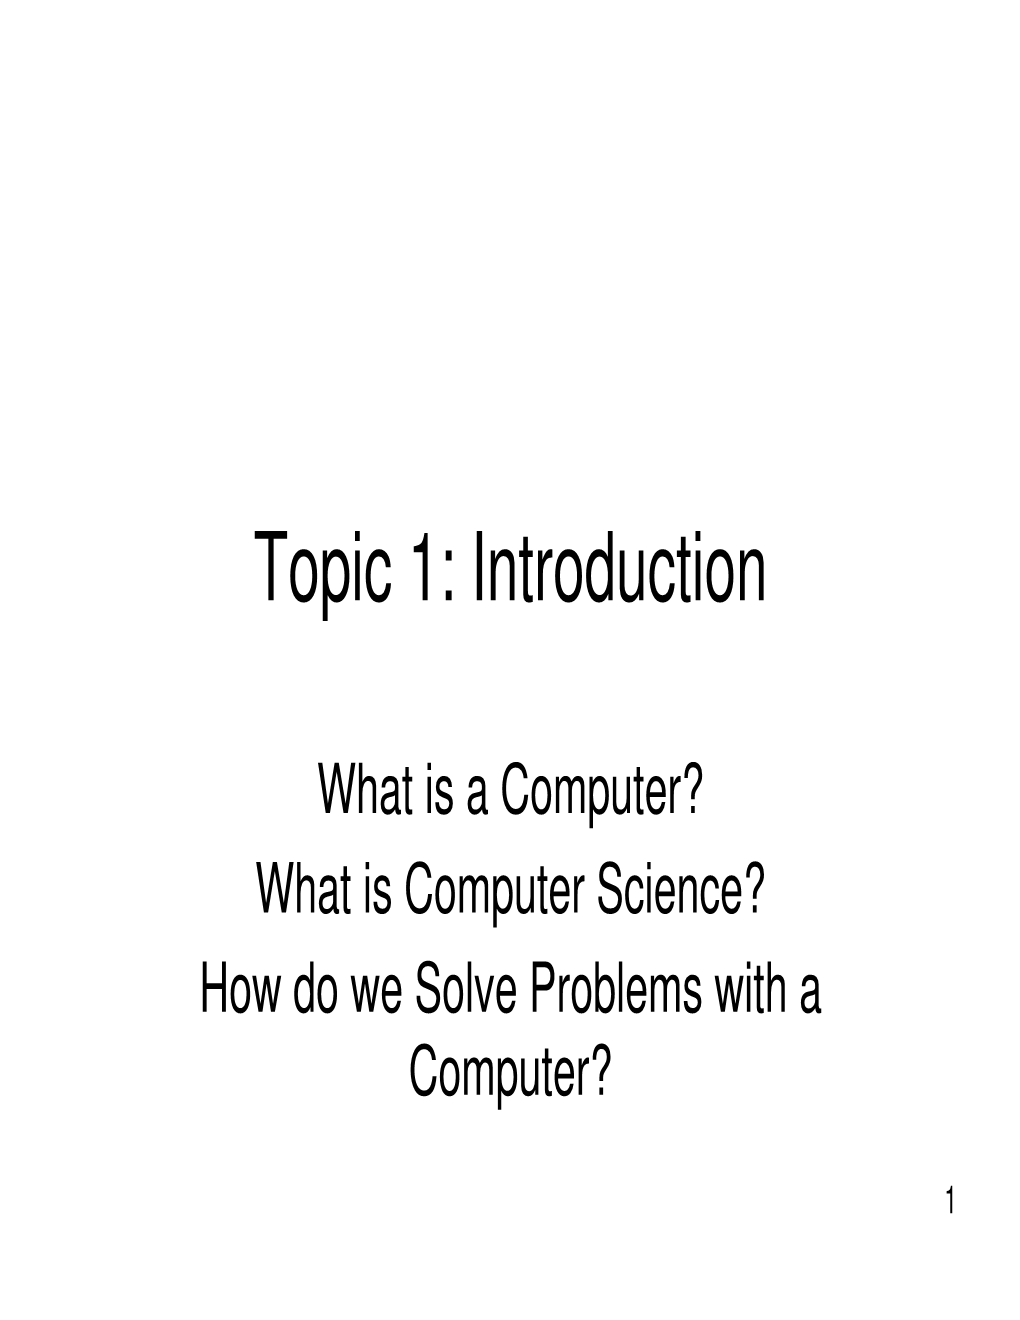 Topic 1: Introduction